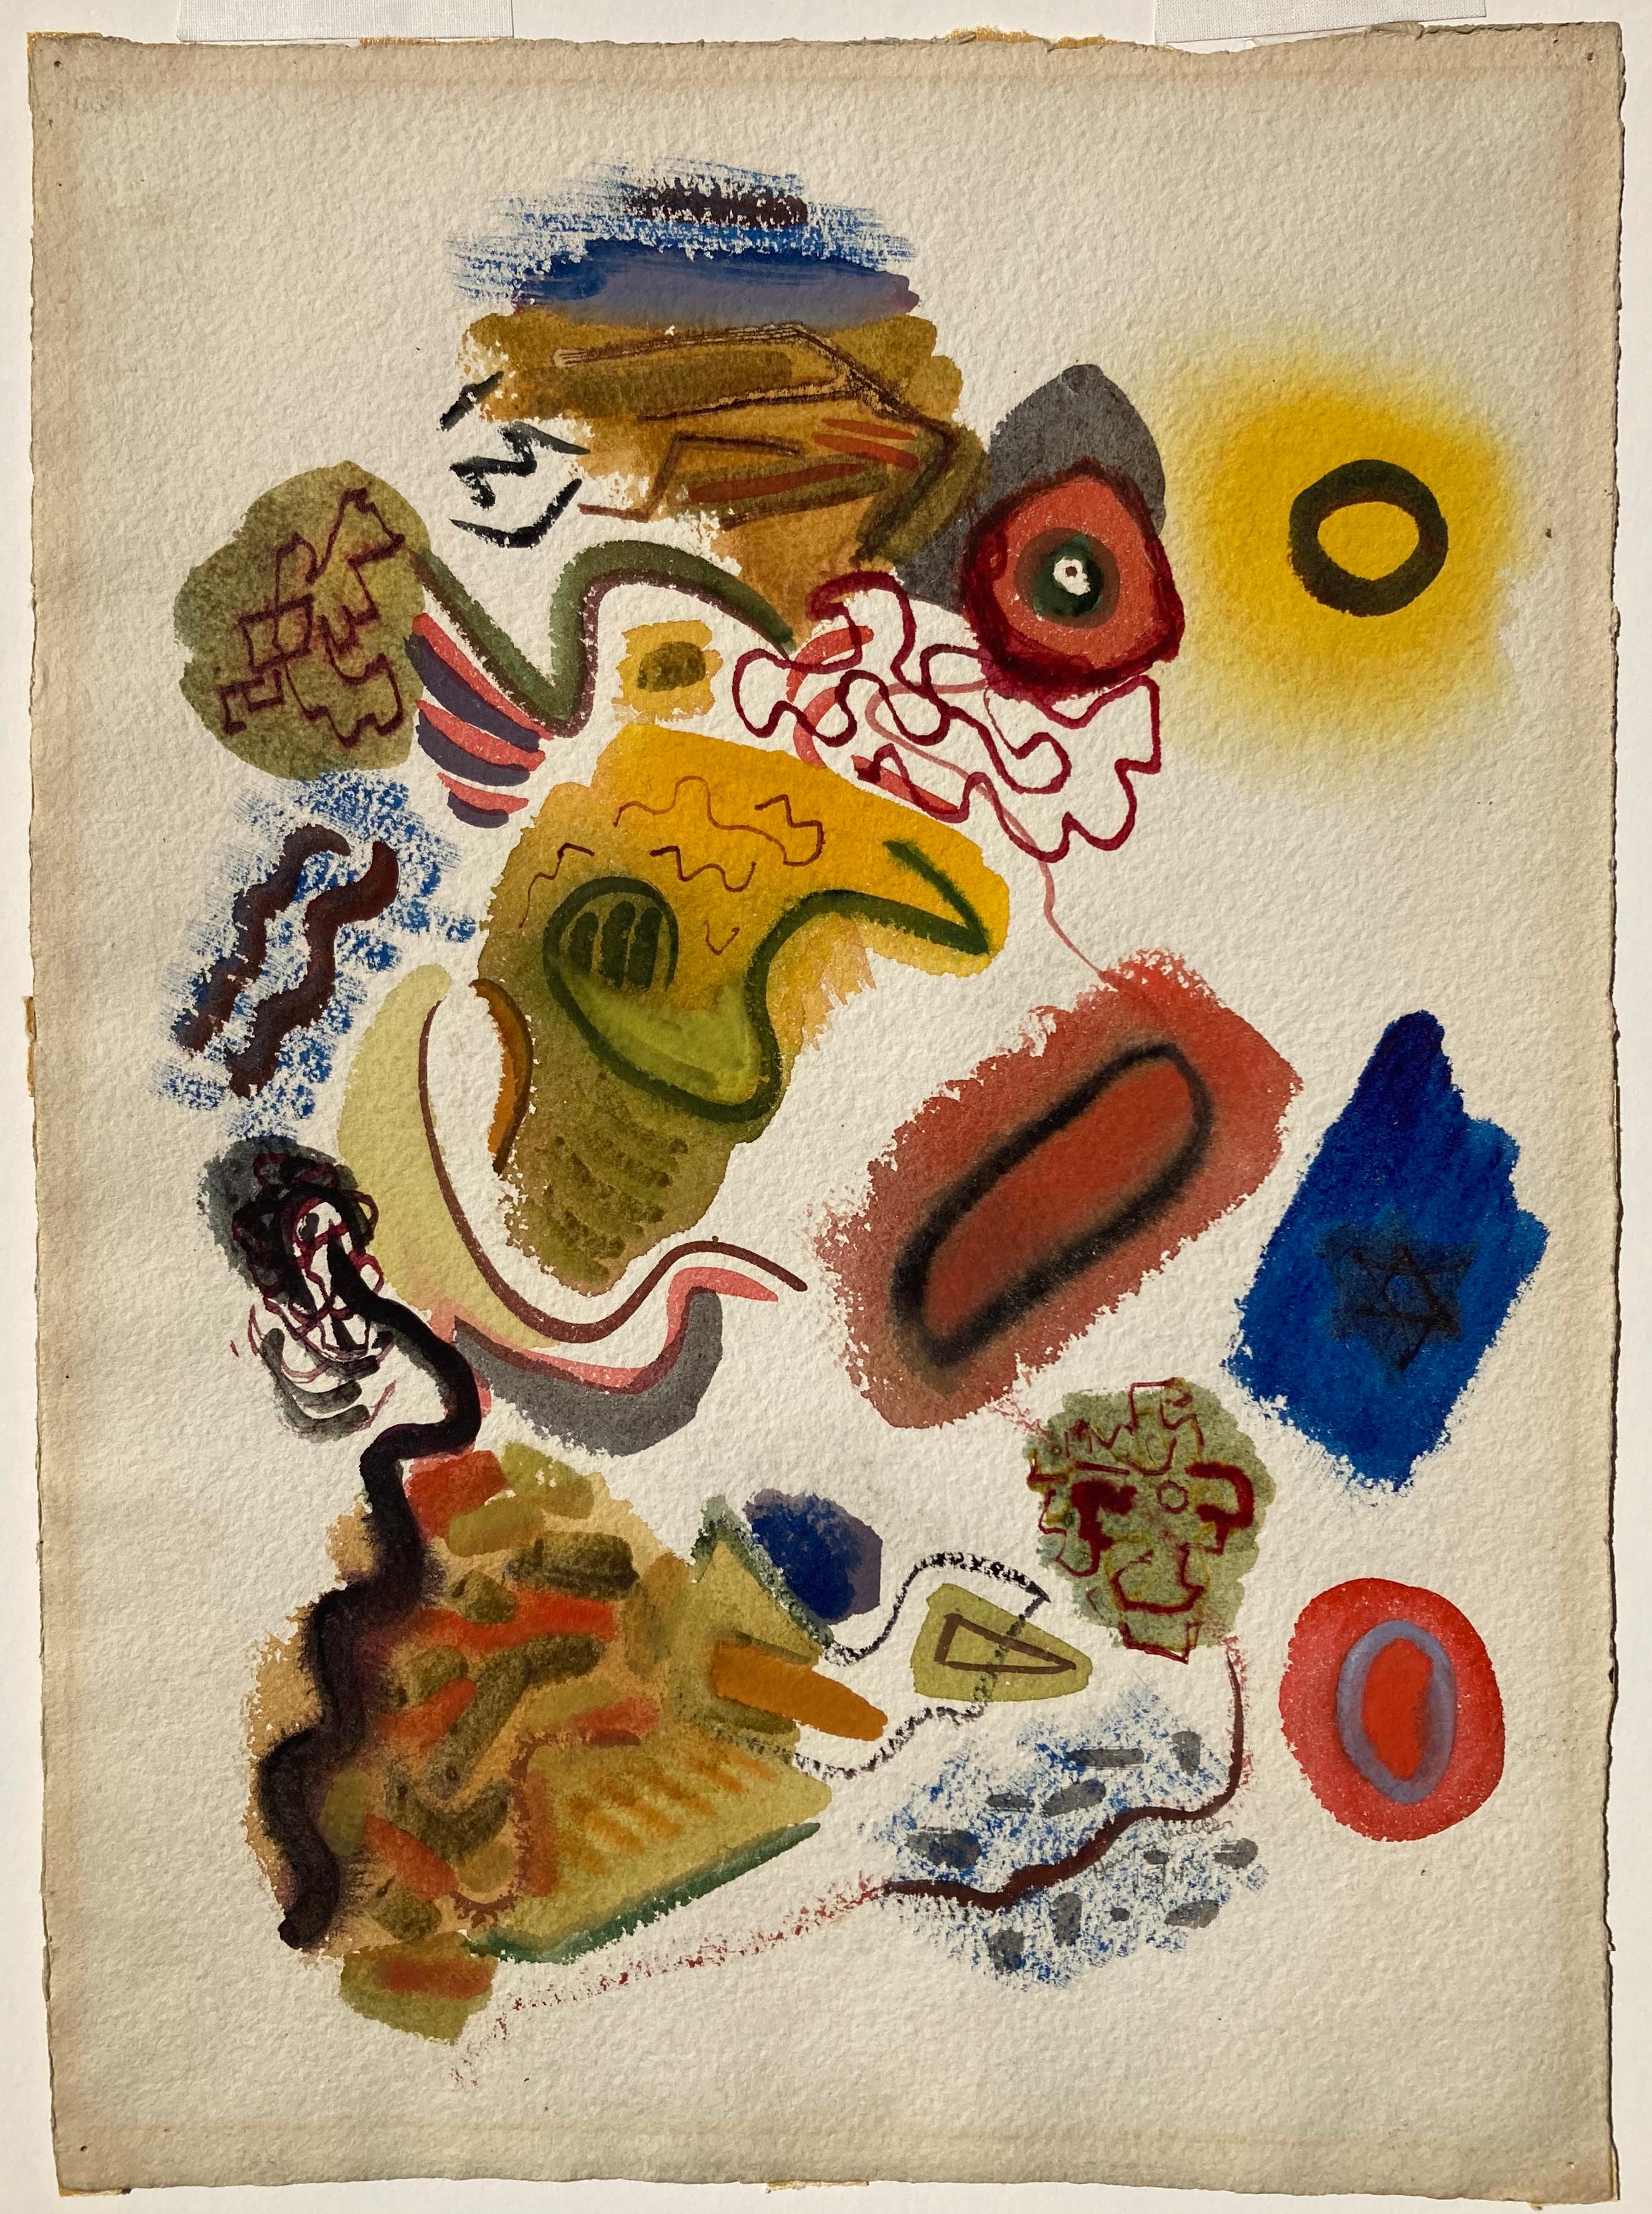 HENRY MILLER (1891 – 1980)

ABSTRACTION,  1946
Original watercolor, signed and dated in pencIl in the image lower right. Image, 14 x 10”. Full sheet 15 ½ x 11 ¼ with deckle edges. Miller, author of Tropic of Cancer, Tropic of Capricorn, Black